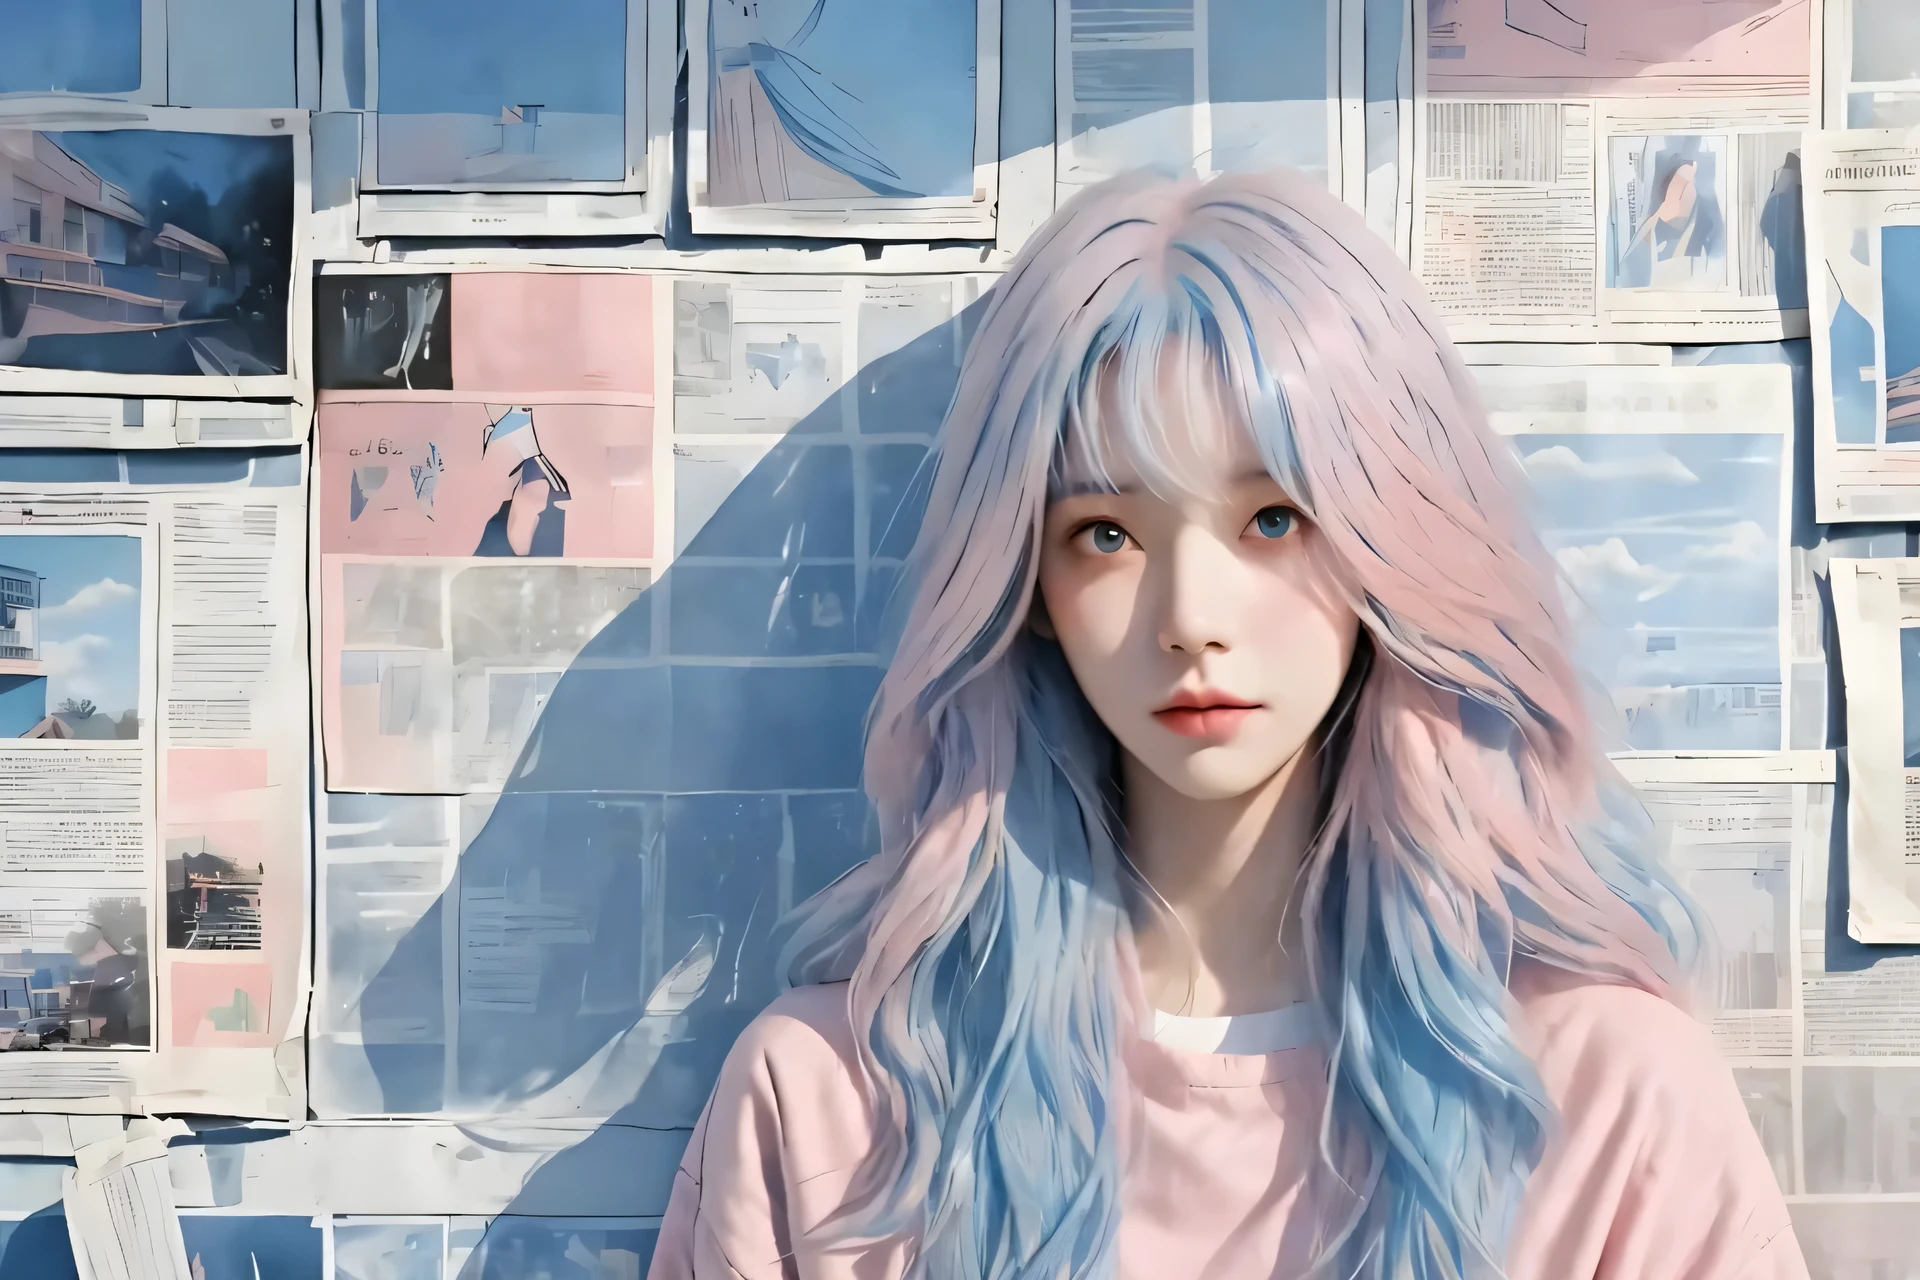 live girl，Has light blue hair and a pink shirt，Standing in front of the newspaper wall, inspired by Yanjun Cheng, Guviz-style artwork, Pink and blue hair, soft Blue and pink tints, Realistic cute girl painting, kawaii realistic portrait, Pink and blue pastels, Blue and pink colors, Blue and pink